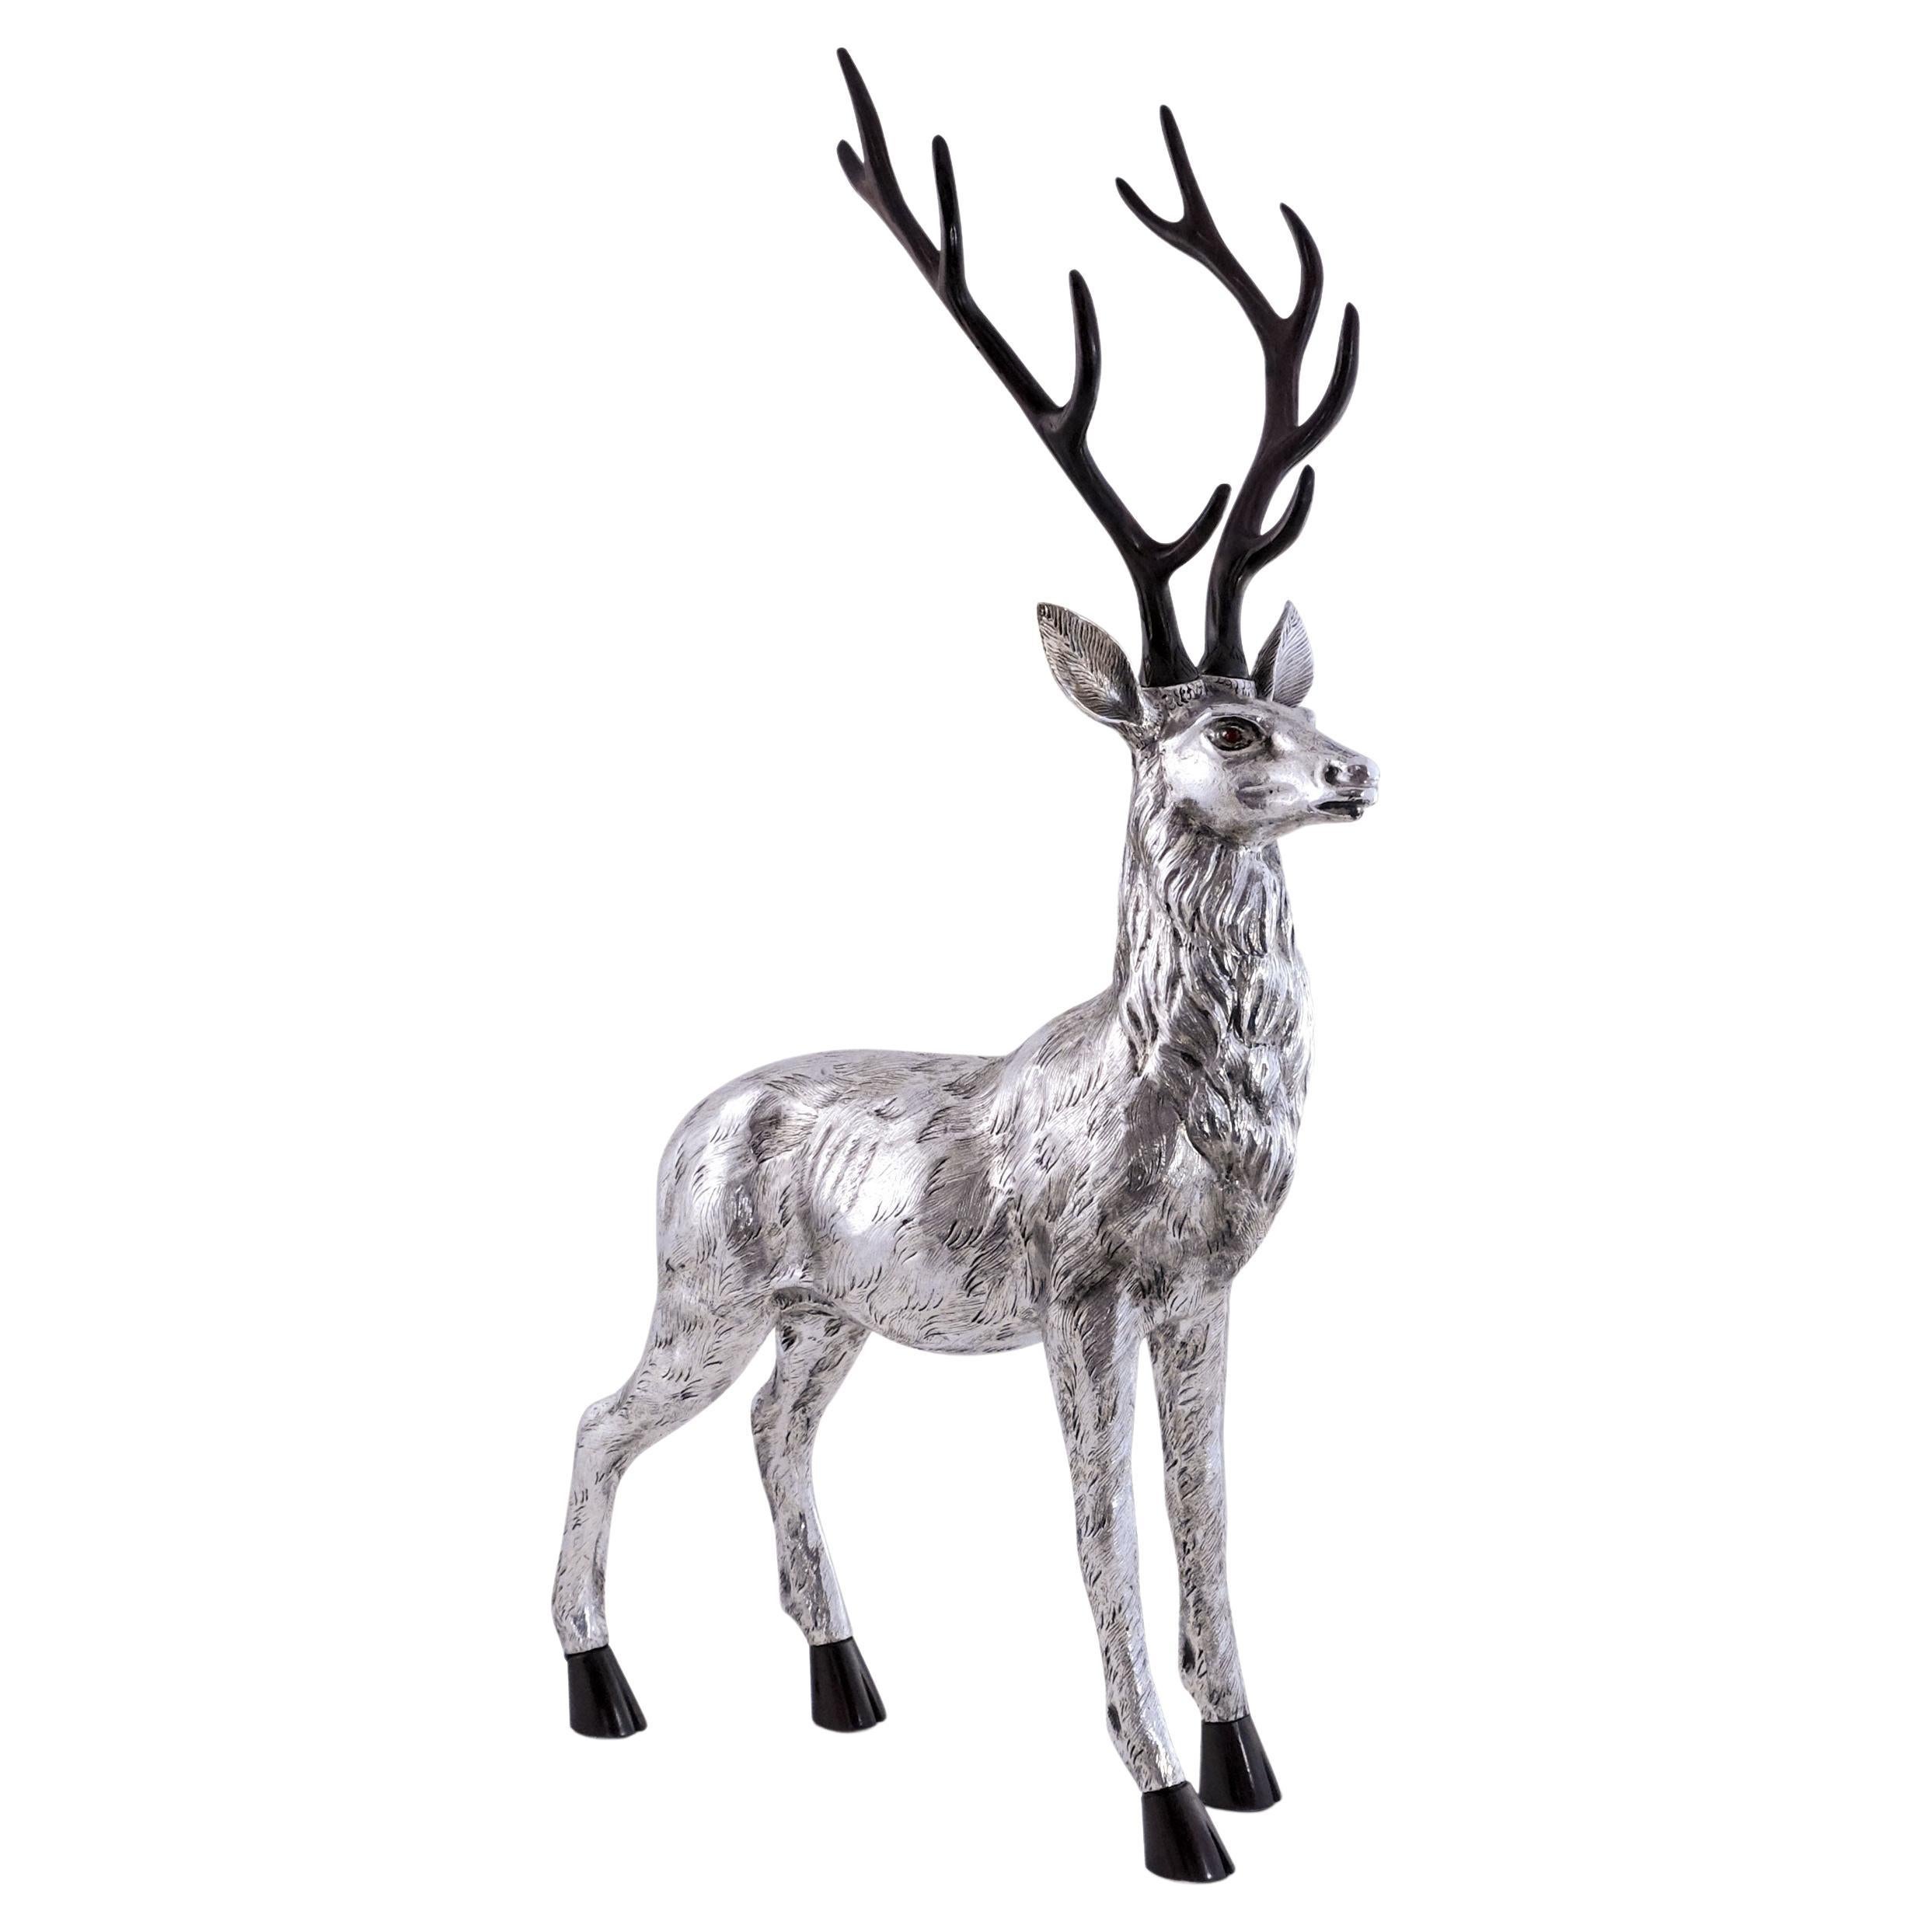 Deer by Alcino Silversmith Handcrafted in Sterling Silver with Jacaranda Wood For Sale